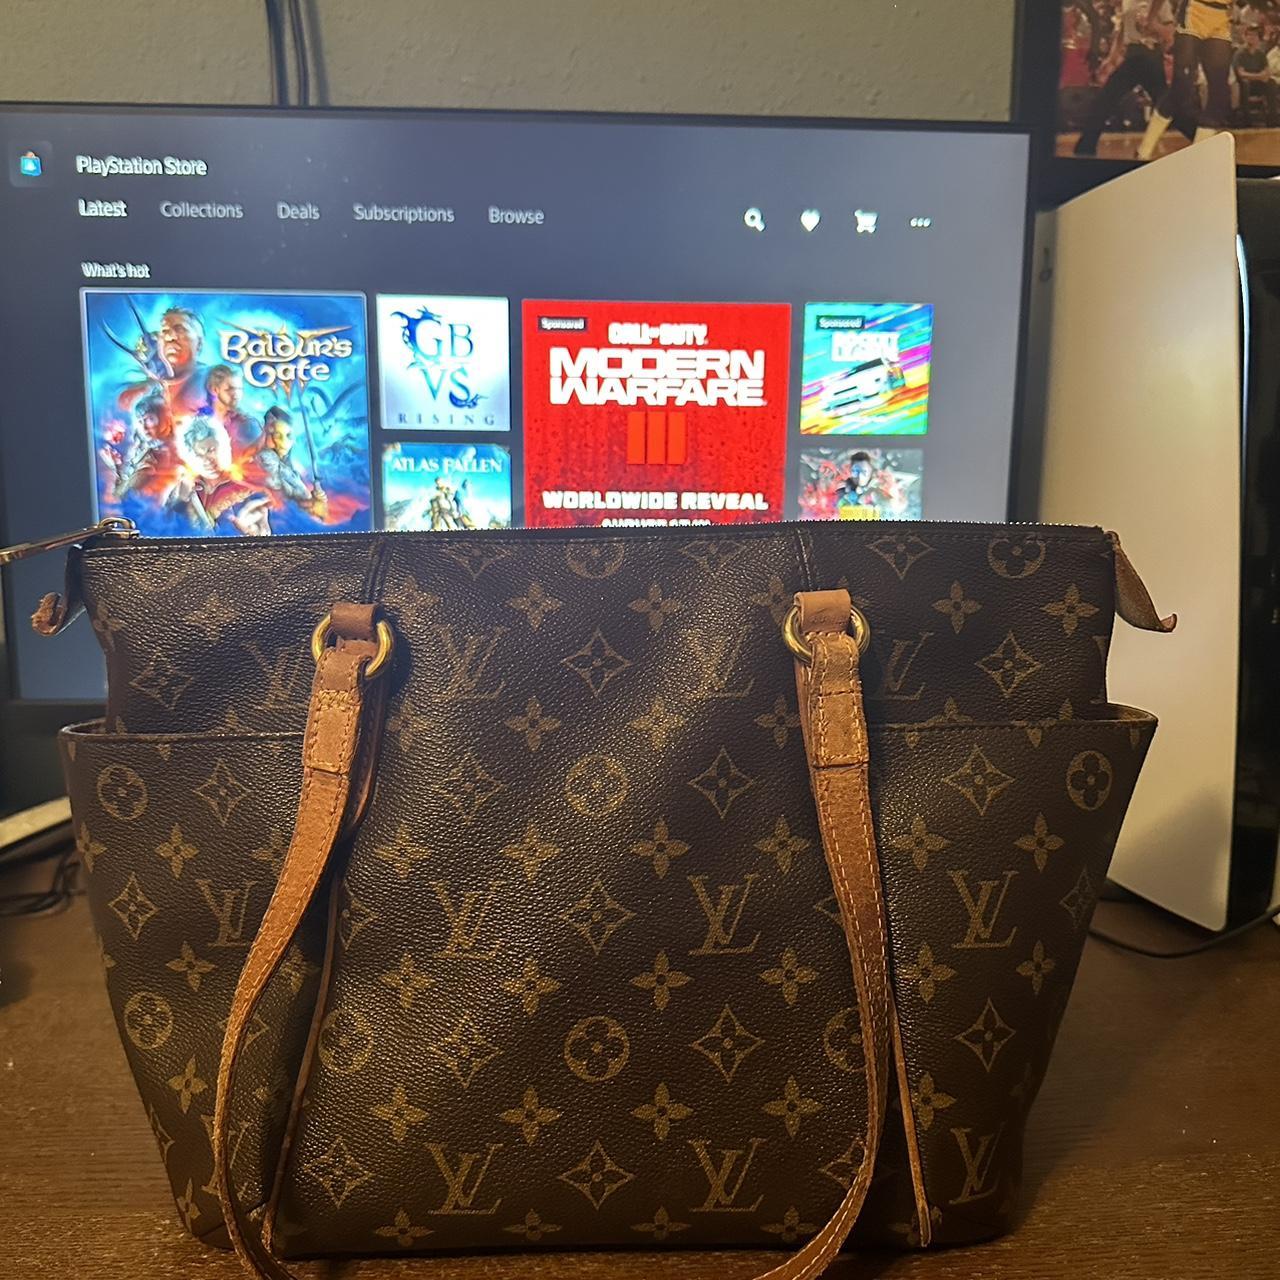 Louis Vuitton bag. I bought the bag used so the - Depop